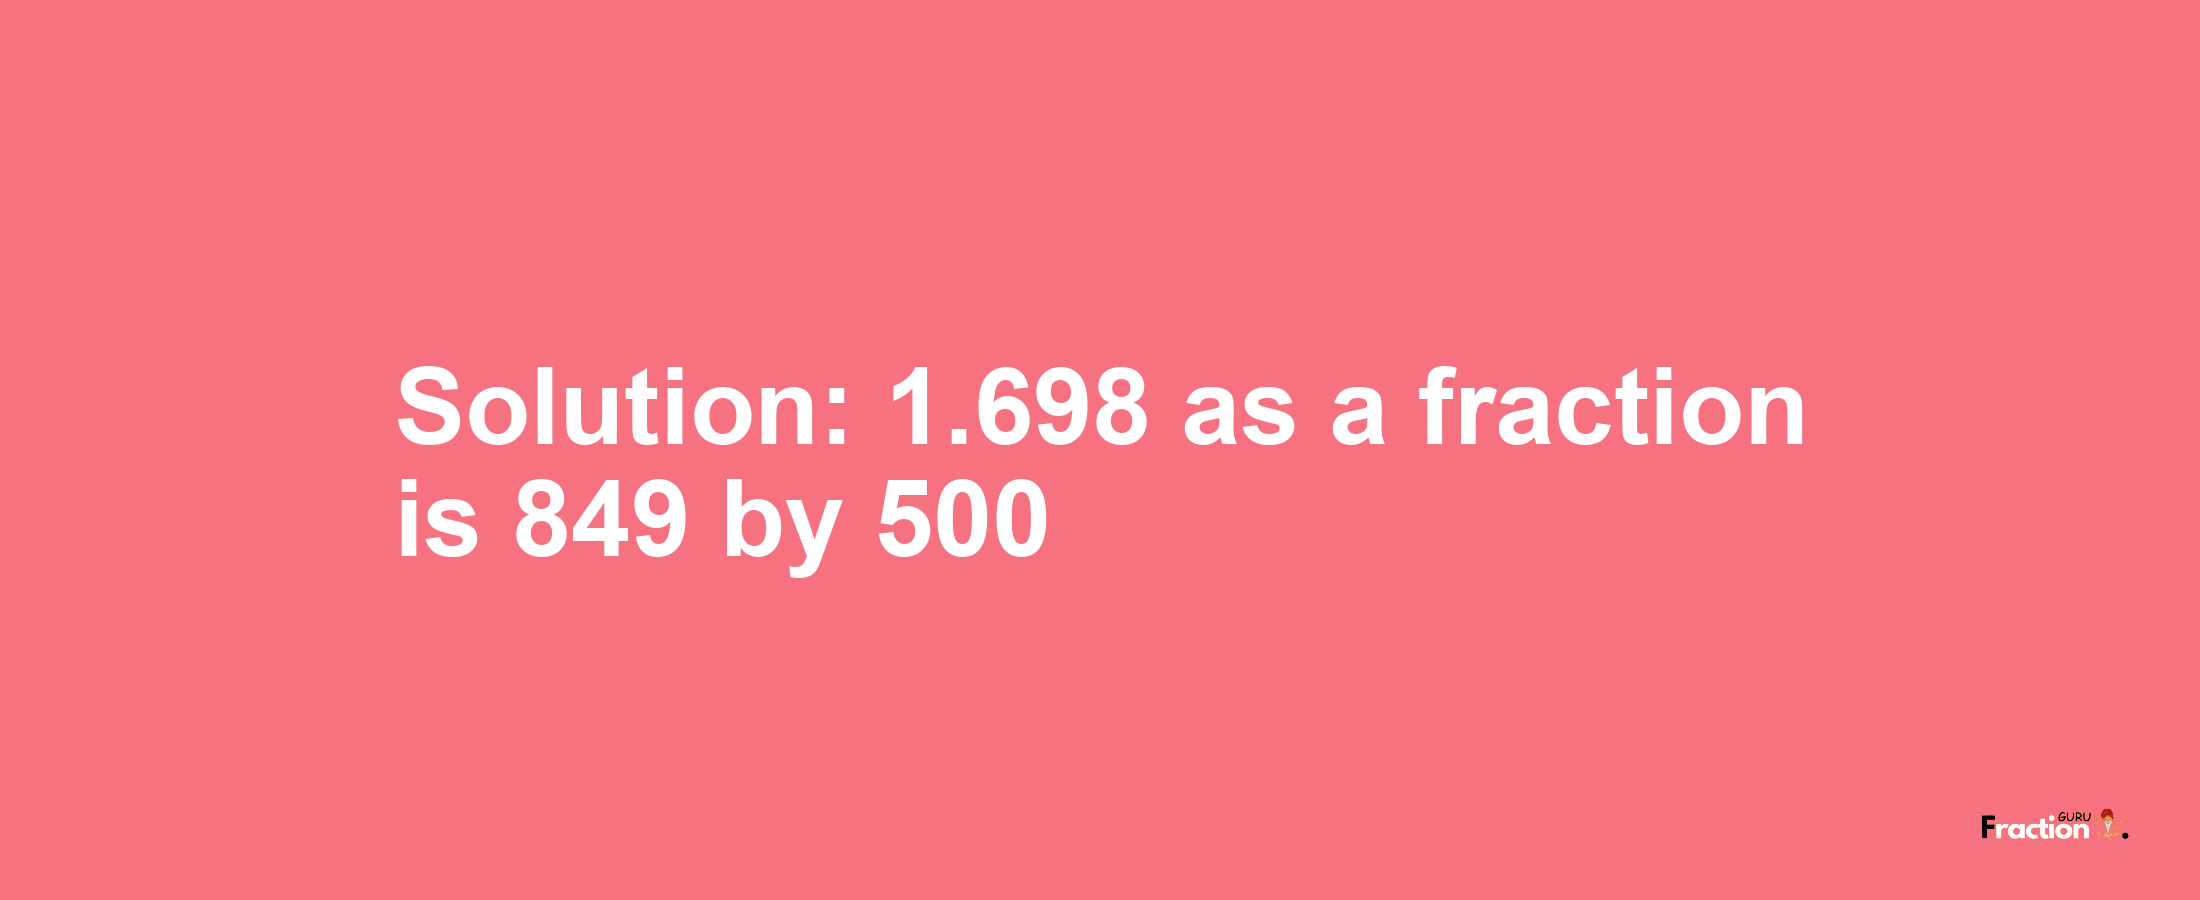 Solution:1.698 as a fraction is 849/500